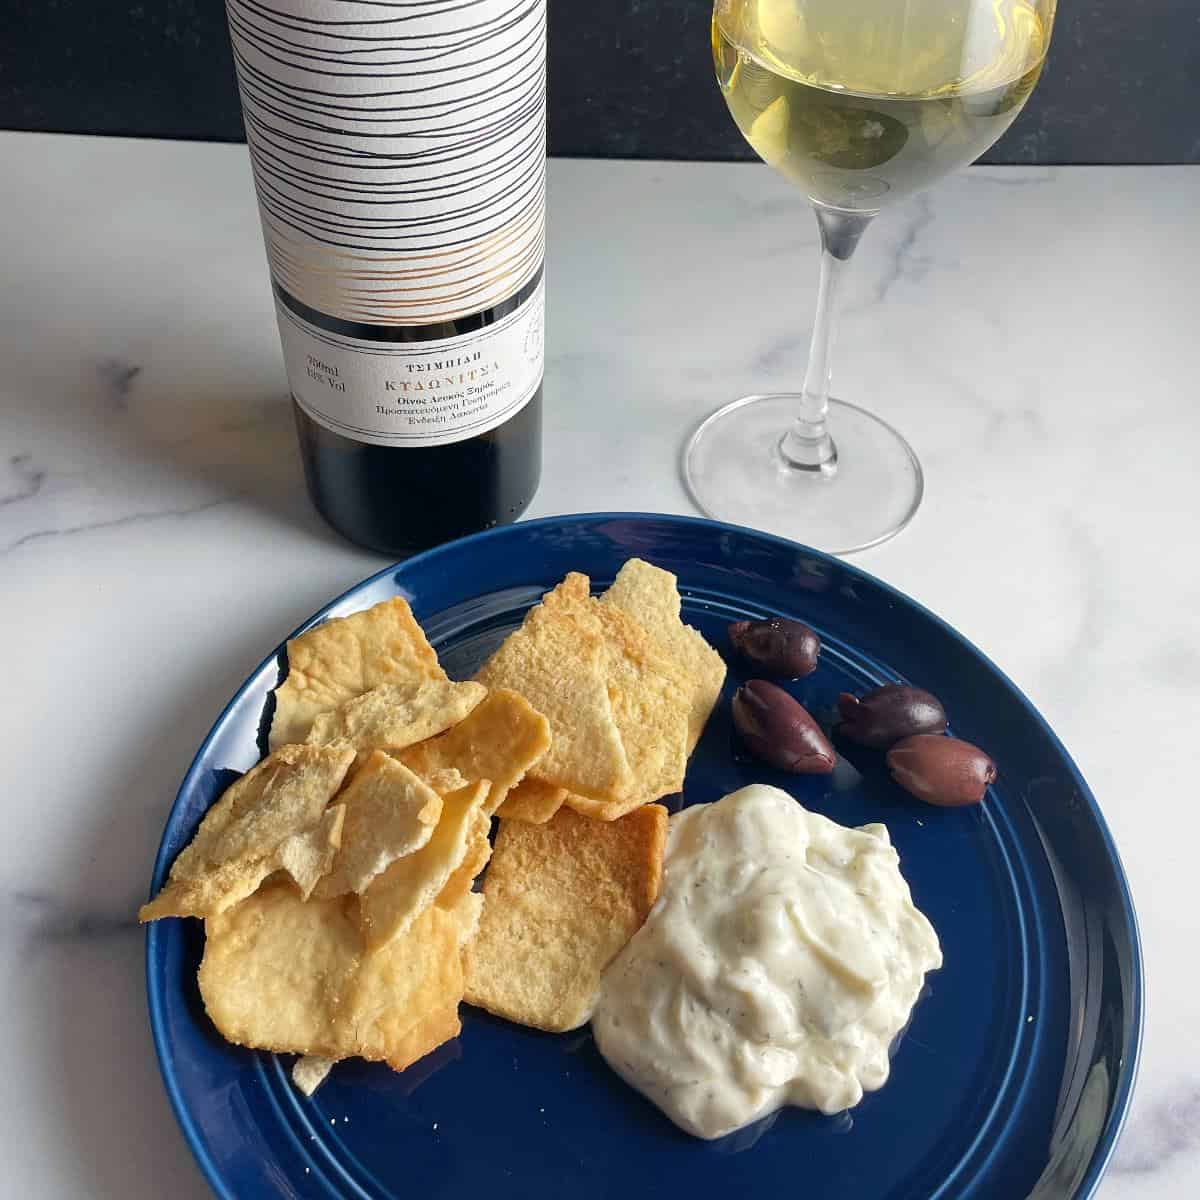 tzatziki dip on a blue plate with pita chips and kalamata olives, served with a Greek white wine.